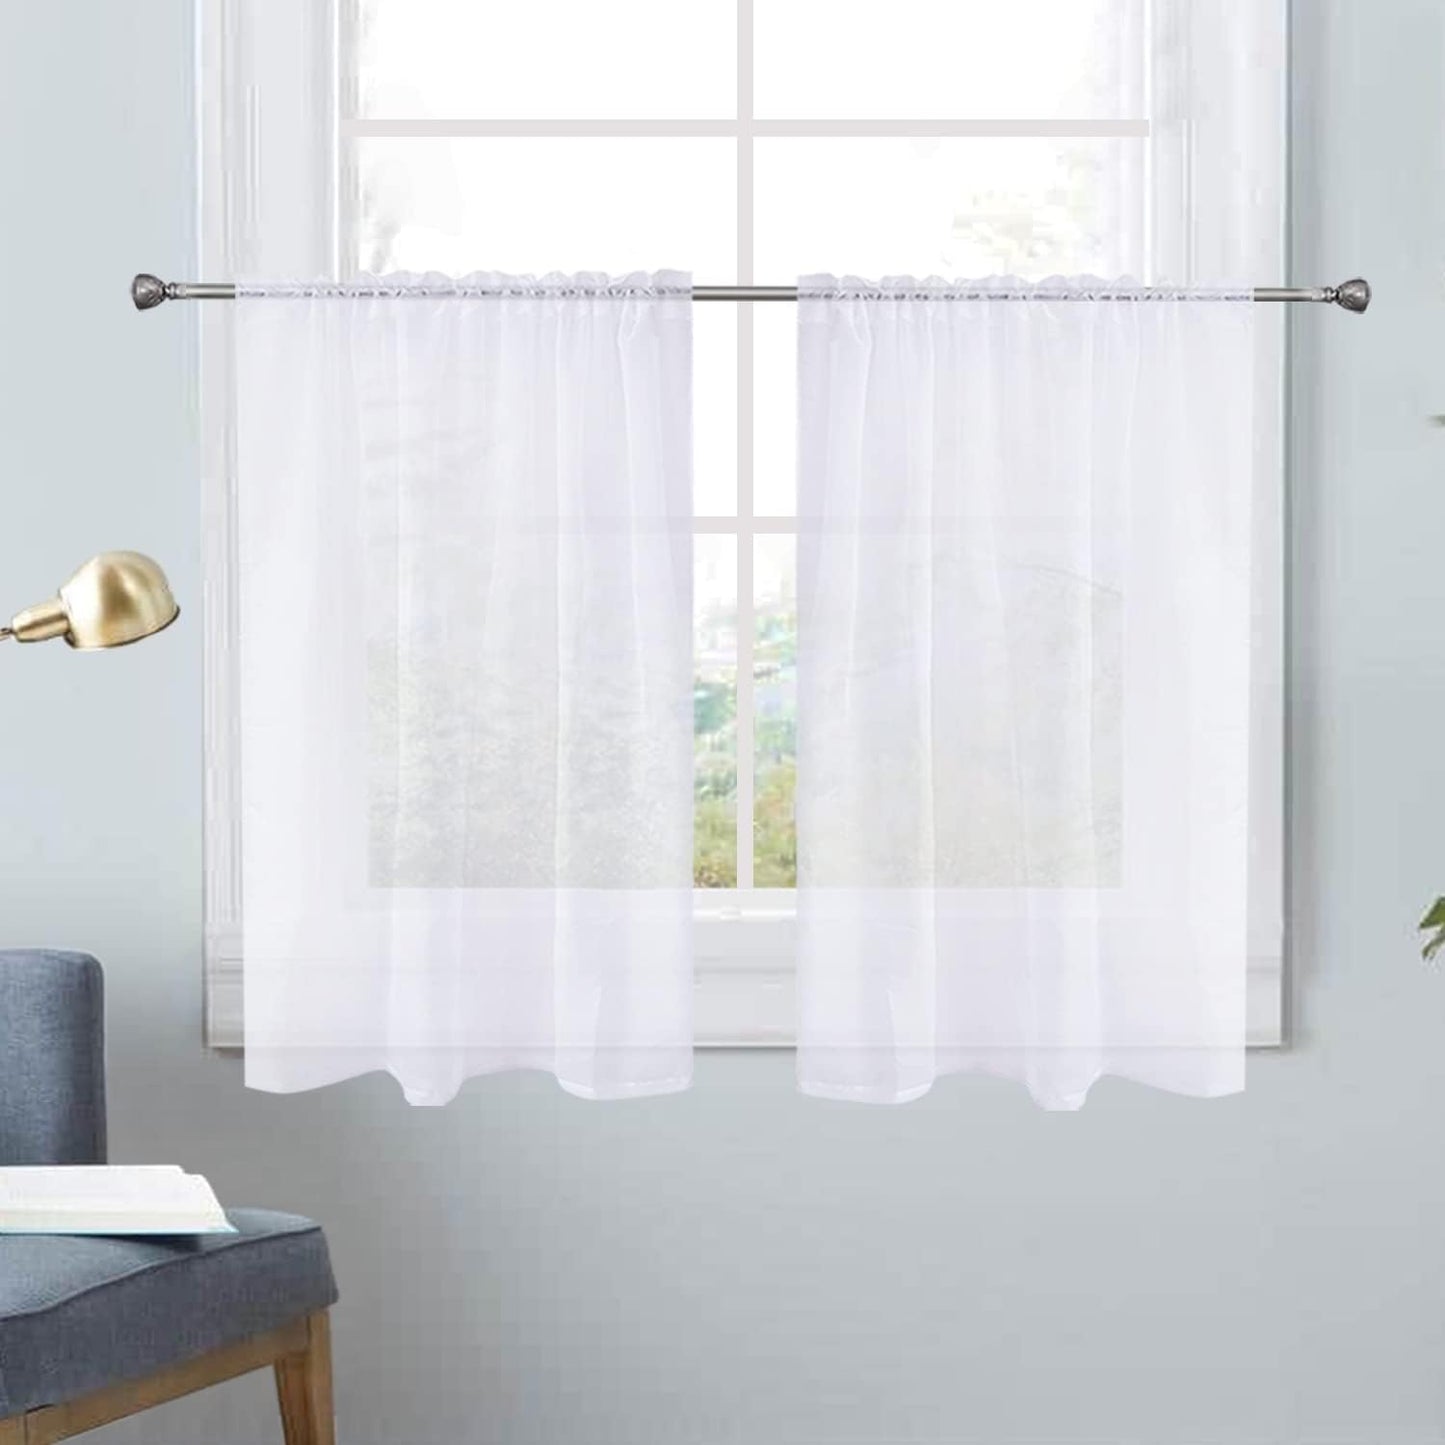 Spacedresser Basic Rod Pocket Sheer Voile Window Curtain Panels White 1 Pair 2 Panels 52 Width 84 Inch Long for Kitchen Bedroom Children Living Room Yard(White,52 W X 84 L)  Lucky Home White 26 W X 30 L 